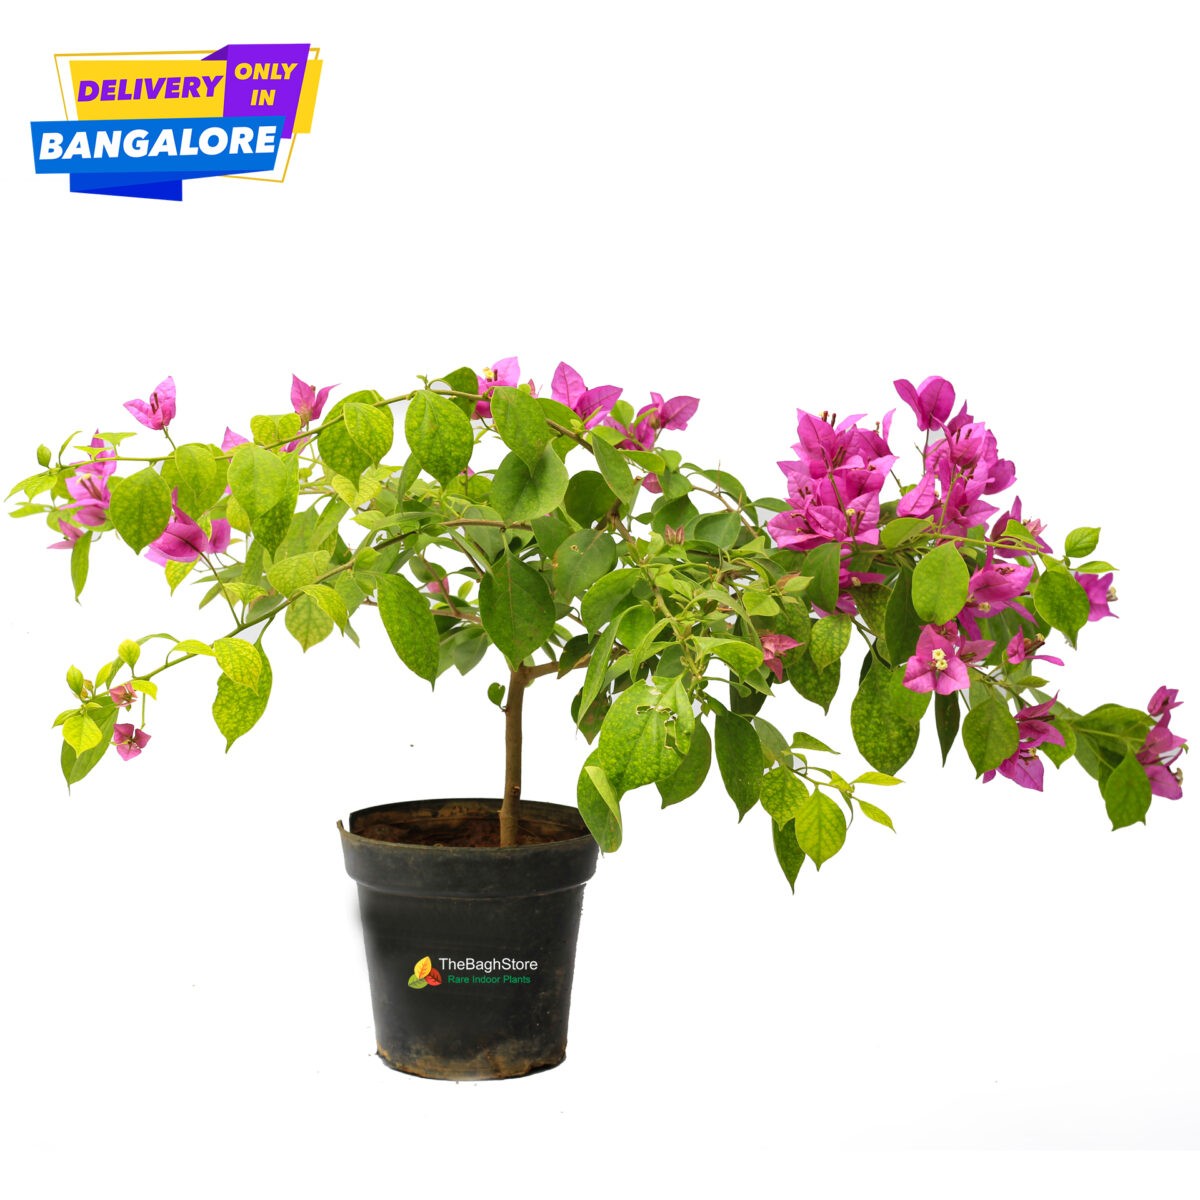 Bougainvillea plant with pink flowers - decorative plant for balcony